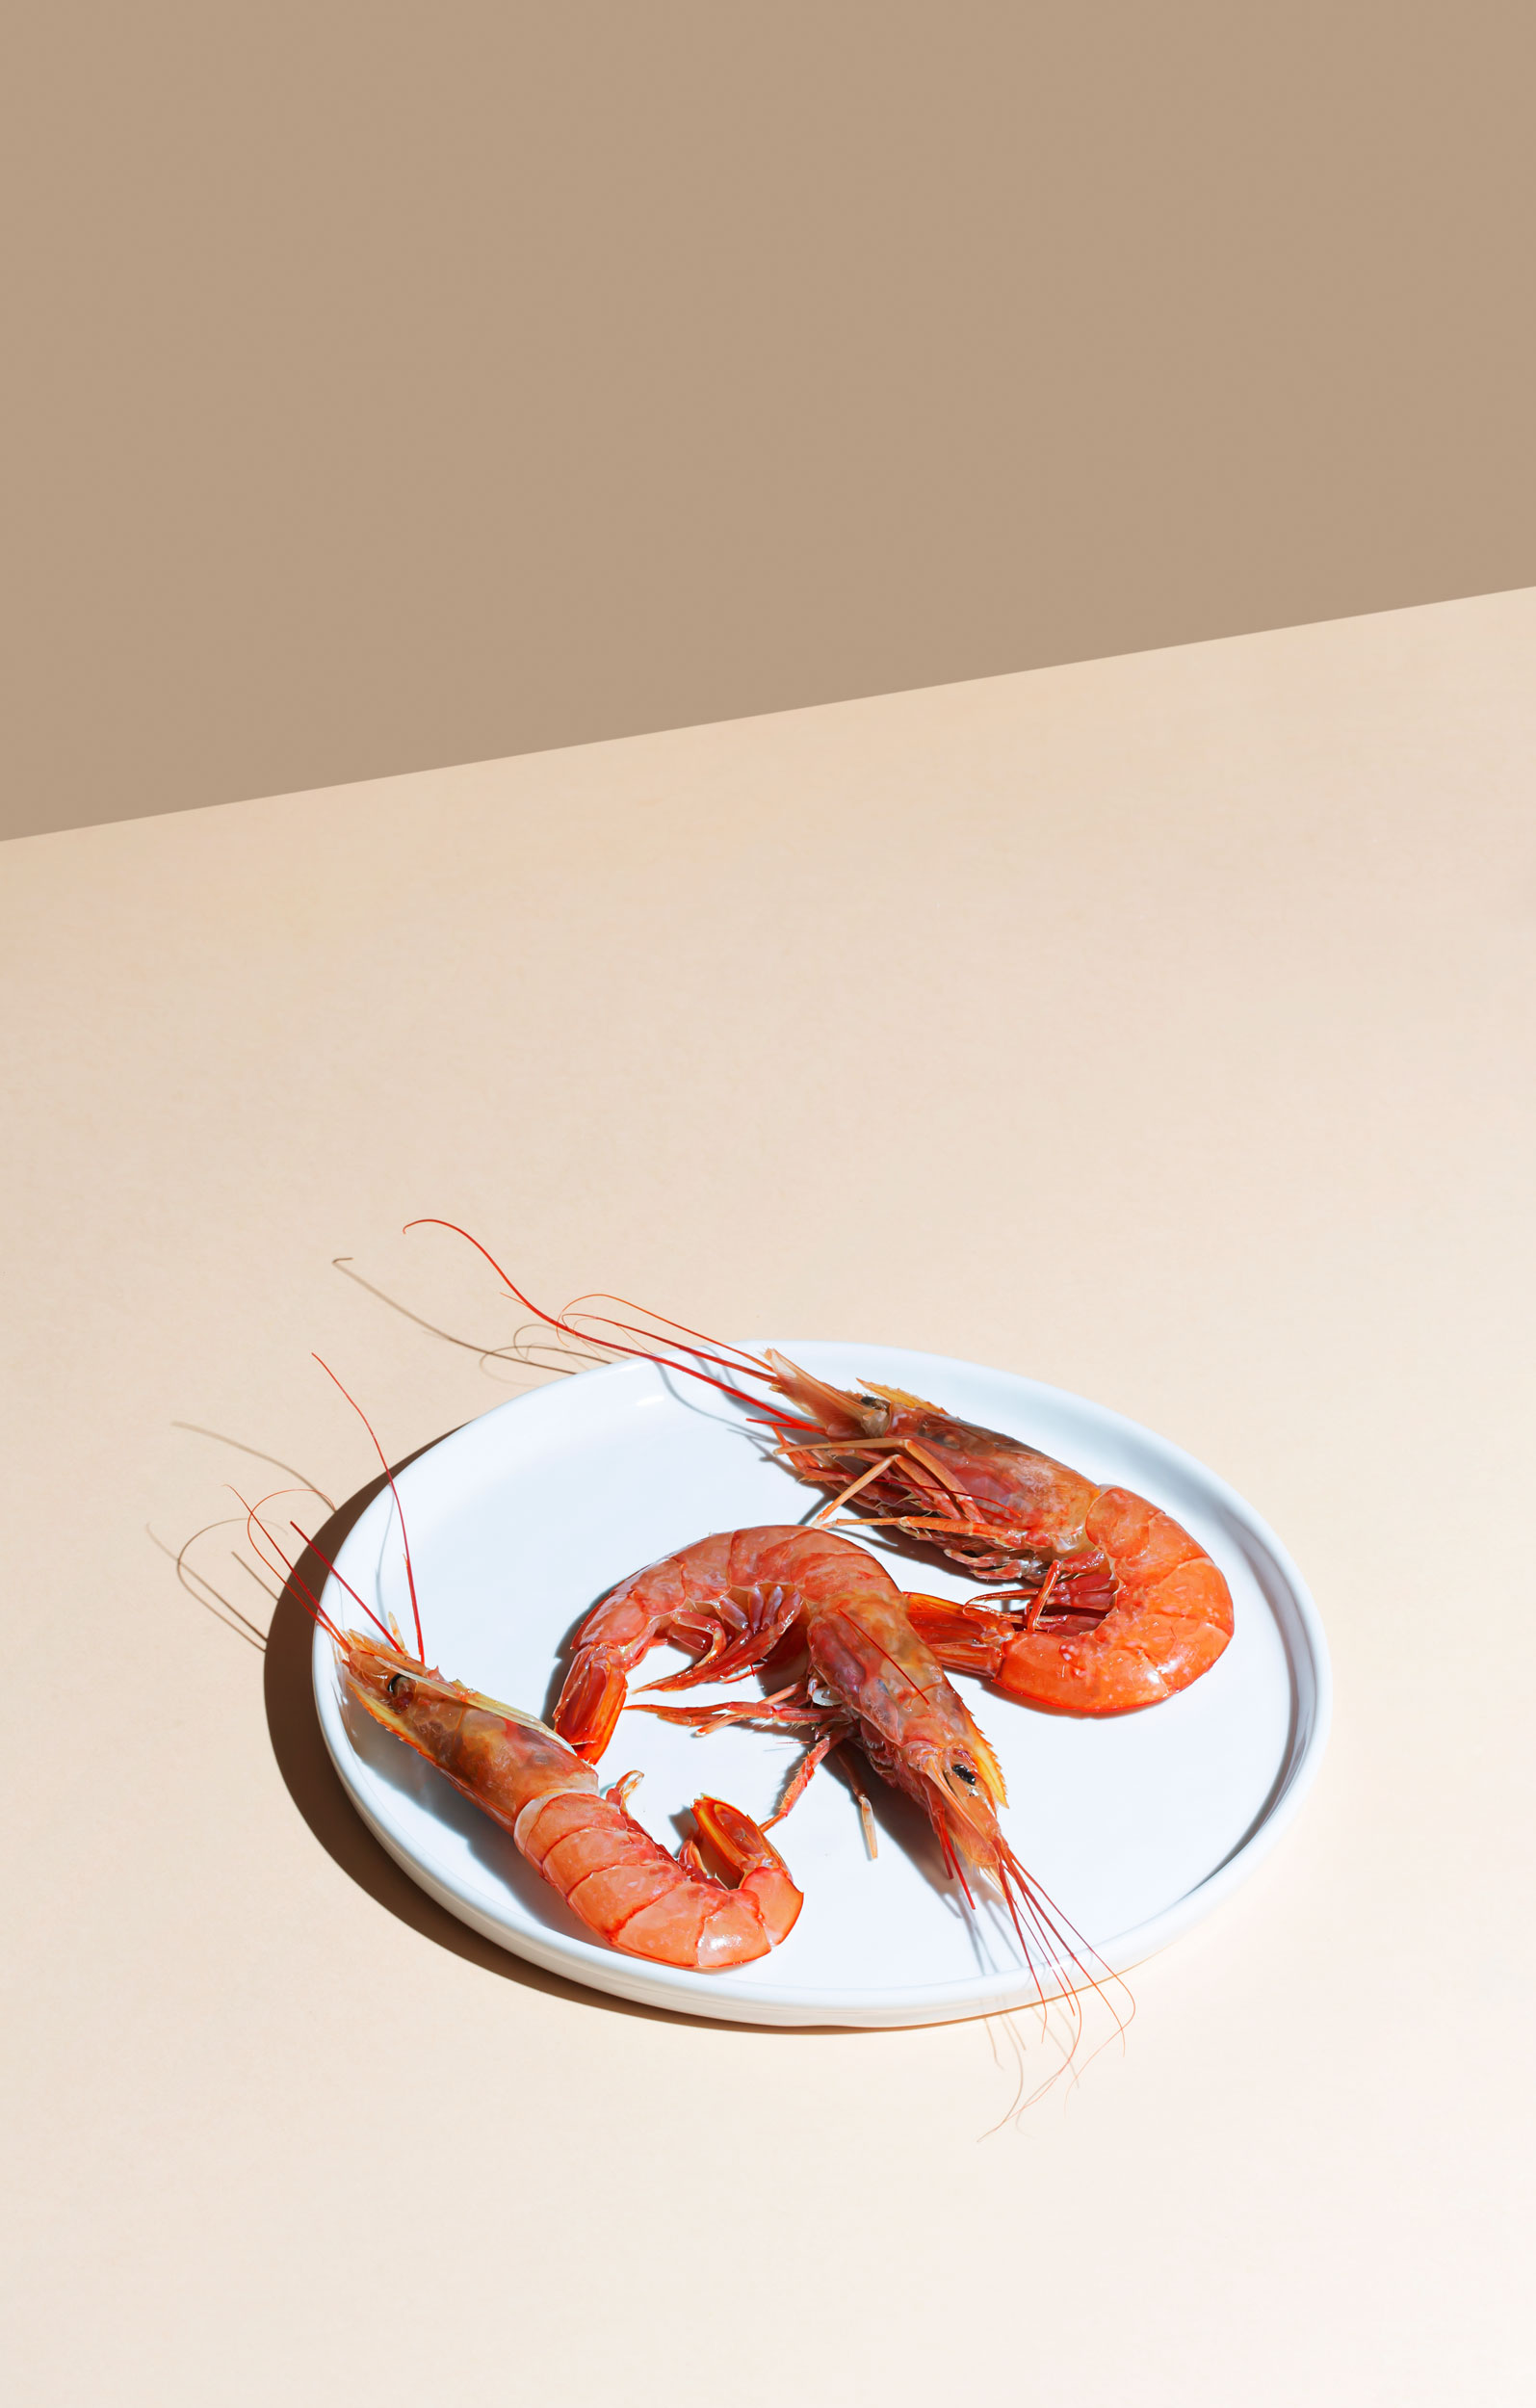 red-shrimps-on-a-white-plate-and-beige-background-2021-08-30-00-04-42-utc